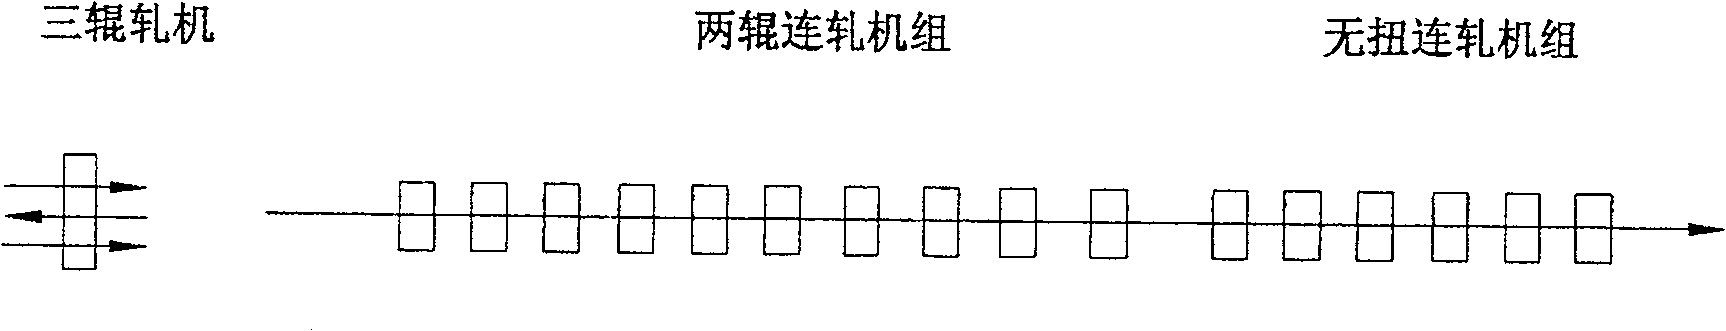 Method for rolling pure titanium rod and wire